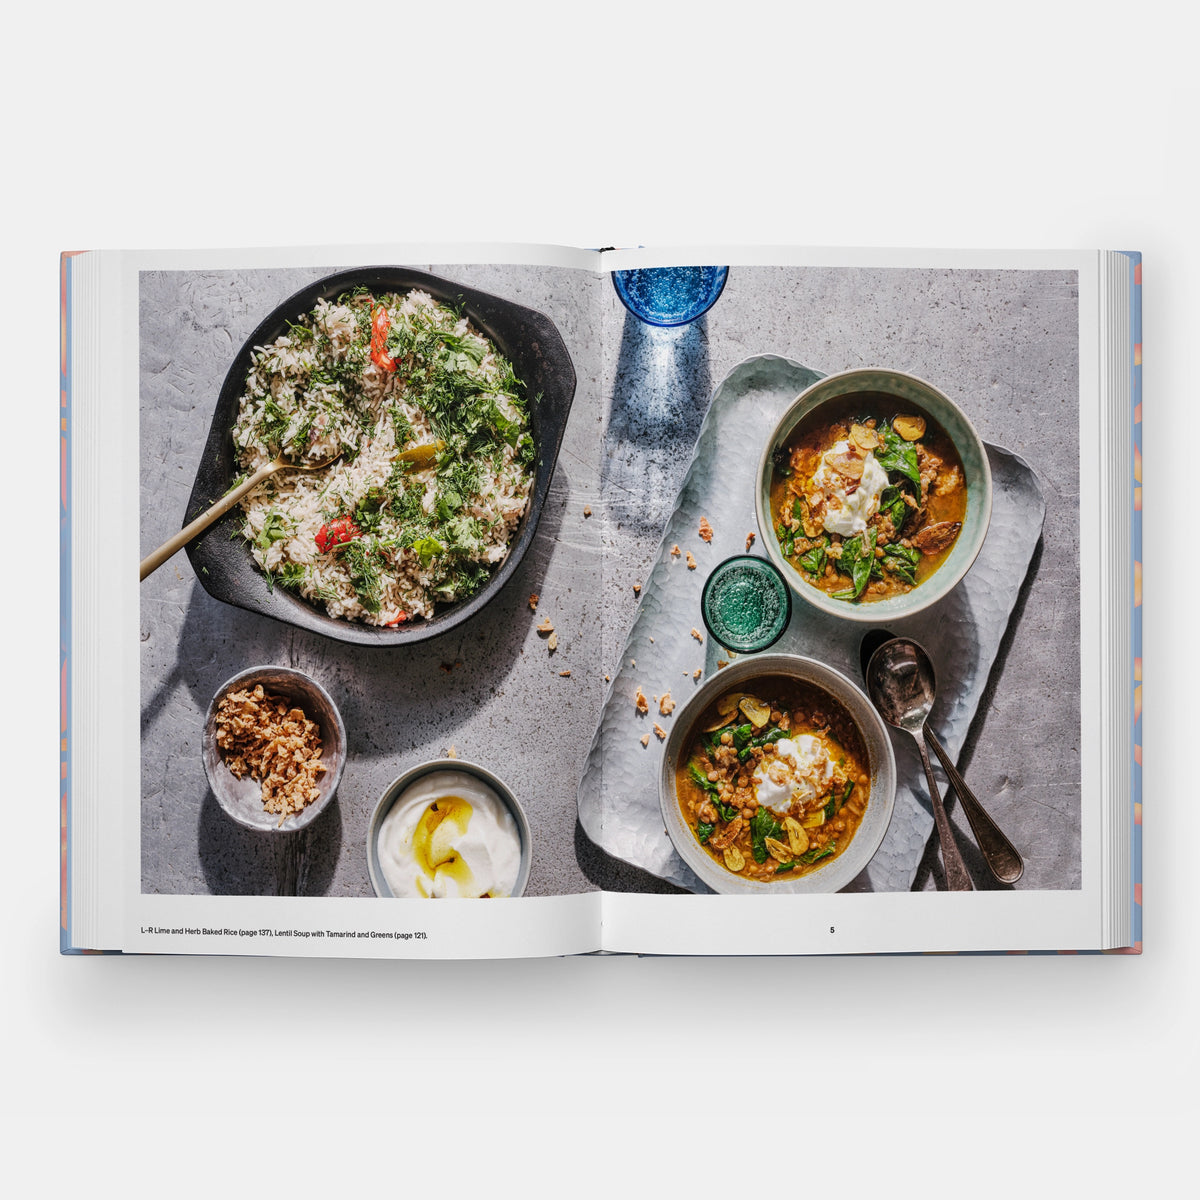 Levantine Vegetarian: Recipes from the Middle East | by Salma Hage - Phaidon Press - Bluecashew Kitchen Homestead